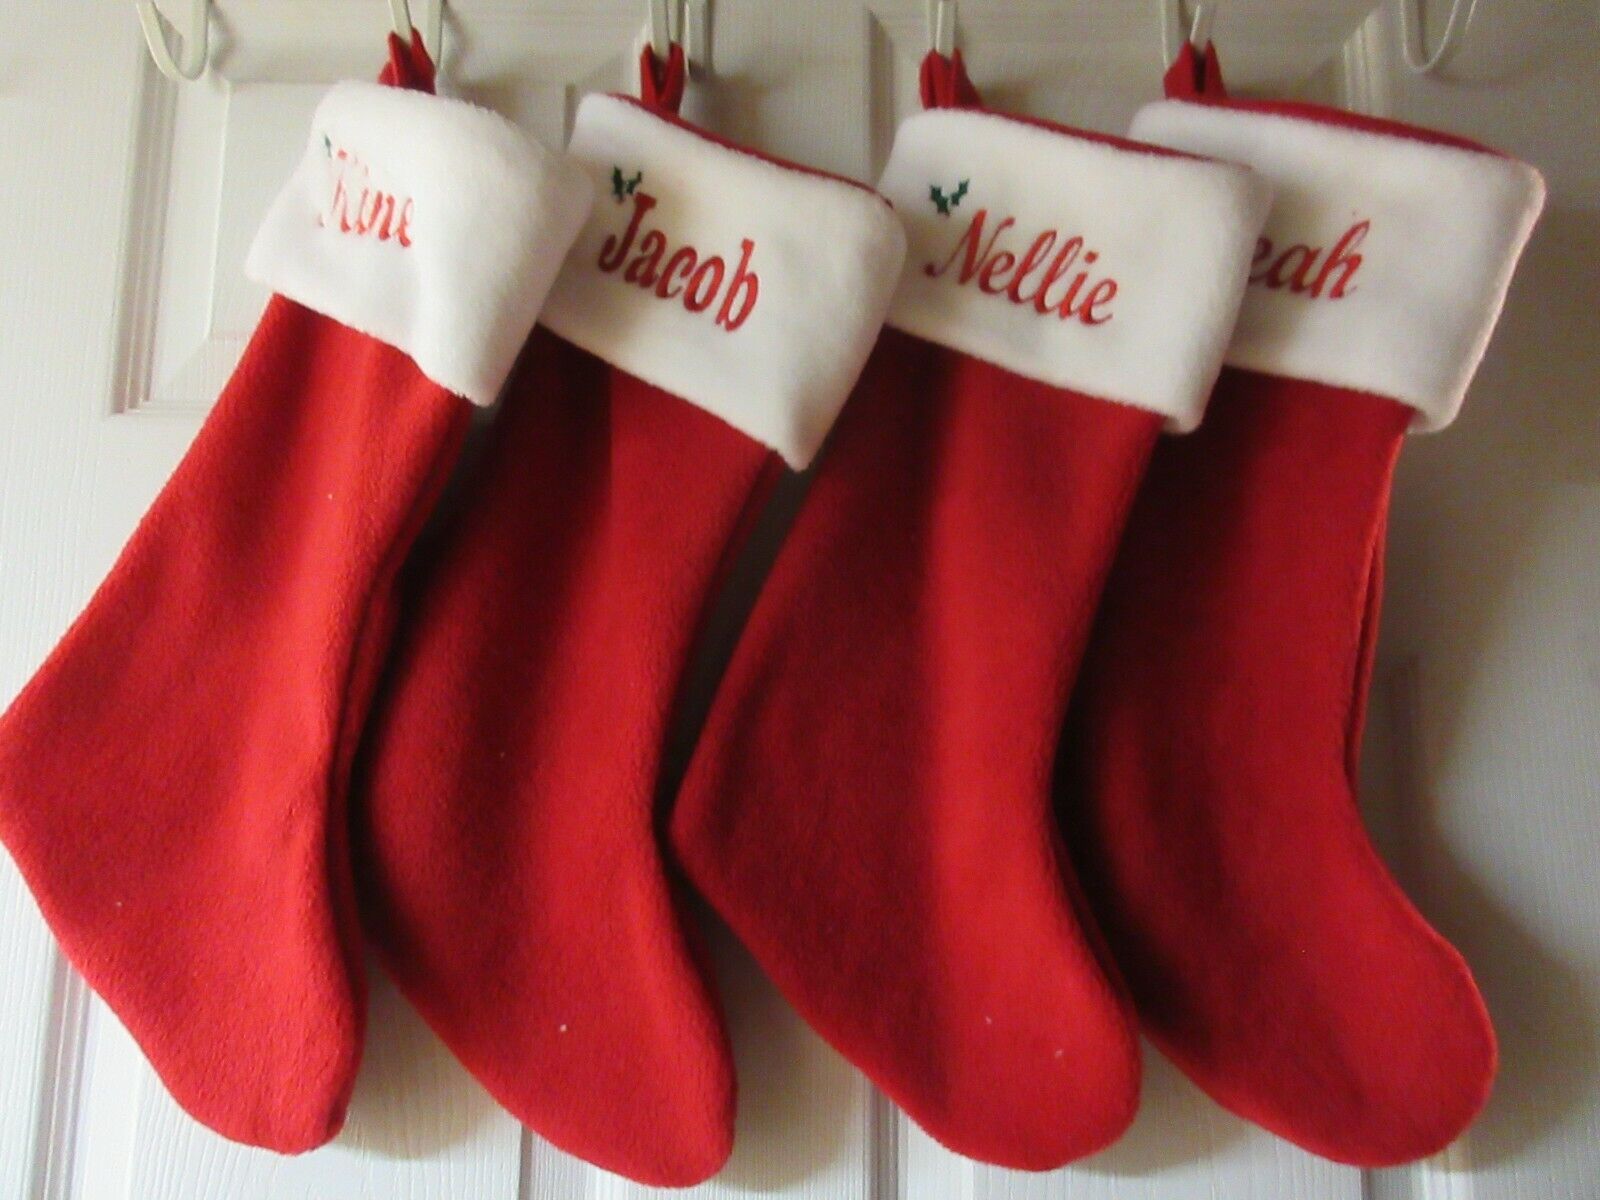 8 Personalized Christmas Stockings, Monogrammed Red Stocking, Custom with Design